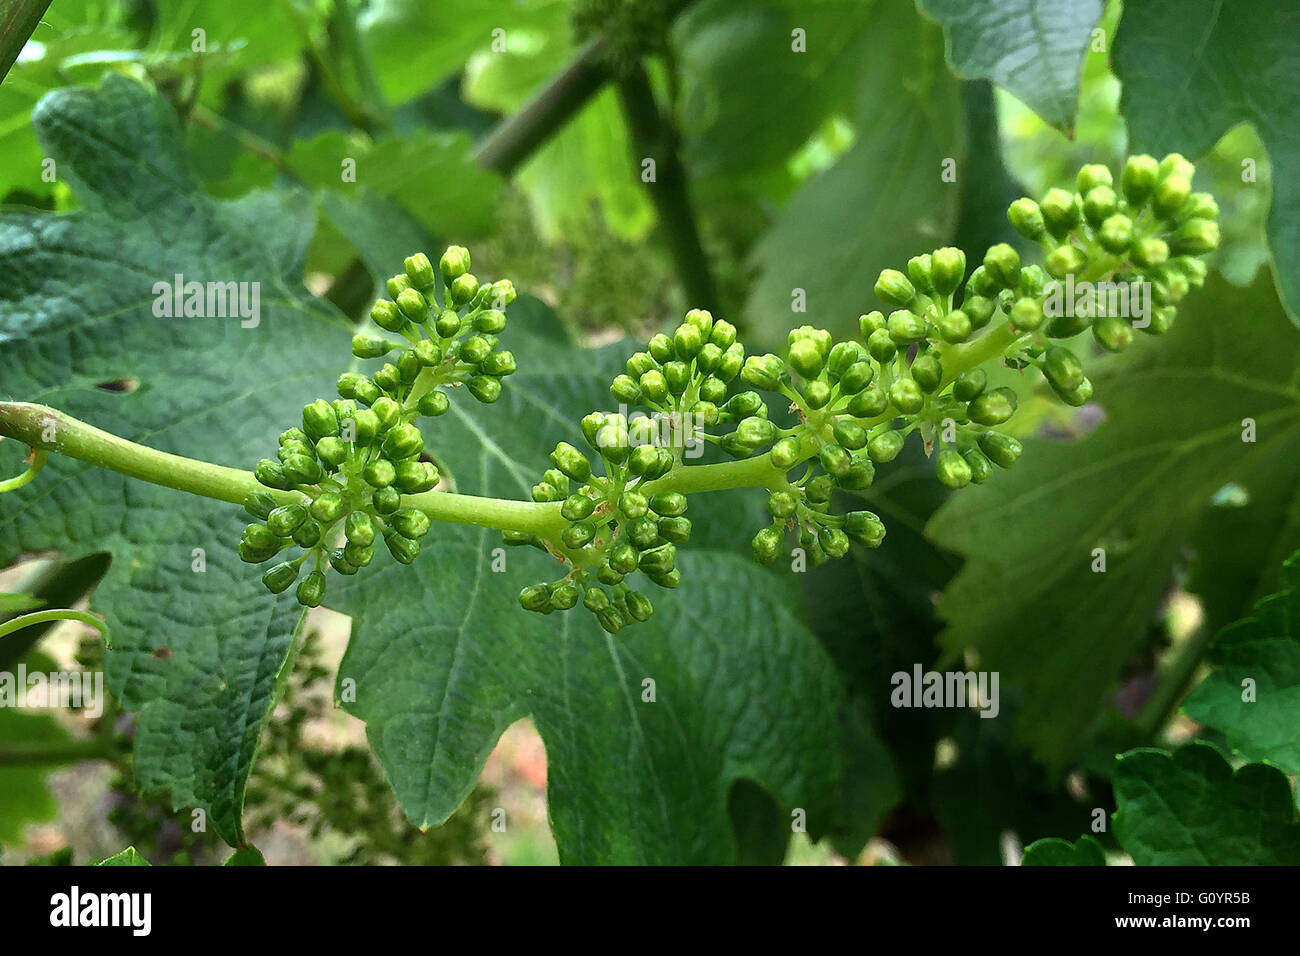 May 4, 2016 - Oakville, CA, U.S. - A cluster of grapes is seen in a vineyard at the Robert Mondavi winery in Oakville on Tuesday. (Credit Image: © Napa Valley Register via ZUMA Wire) Stock Photo